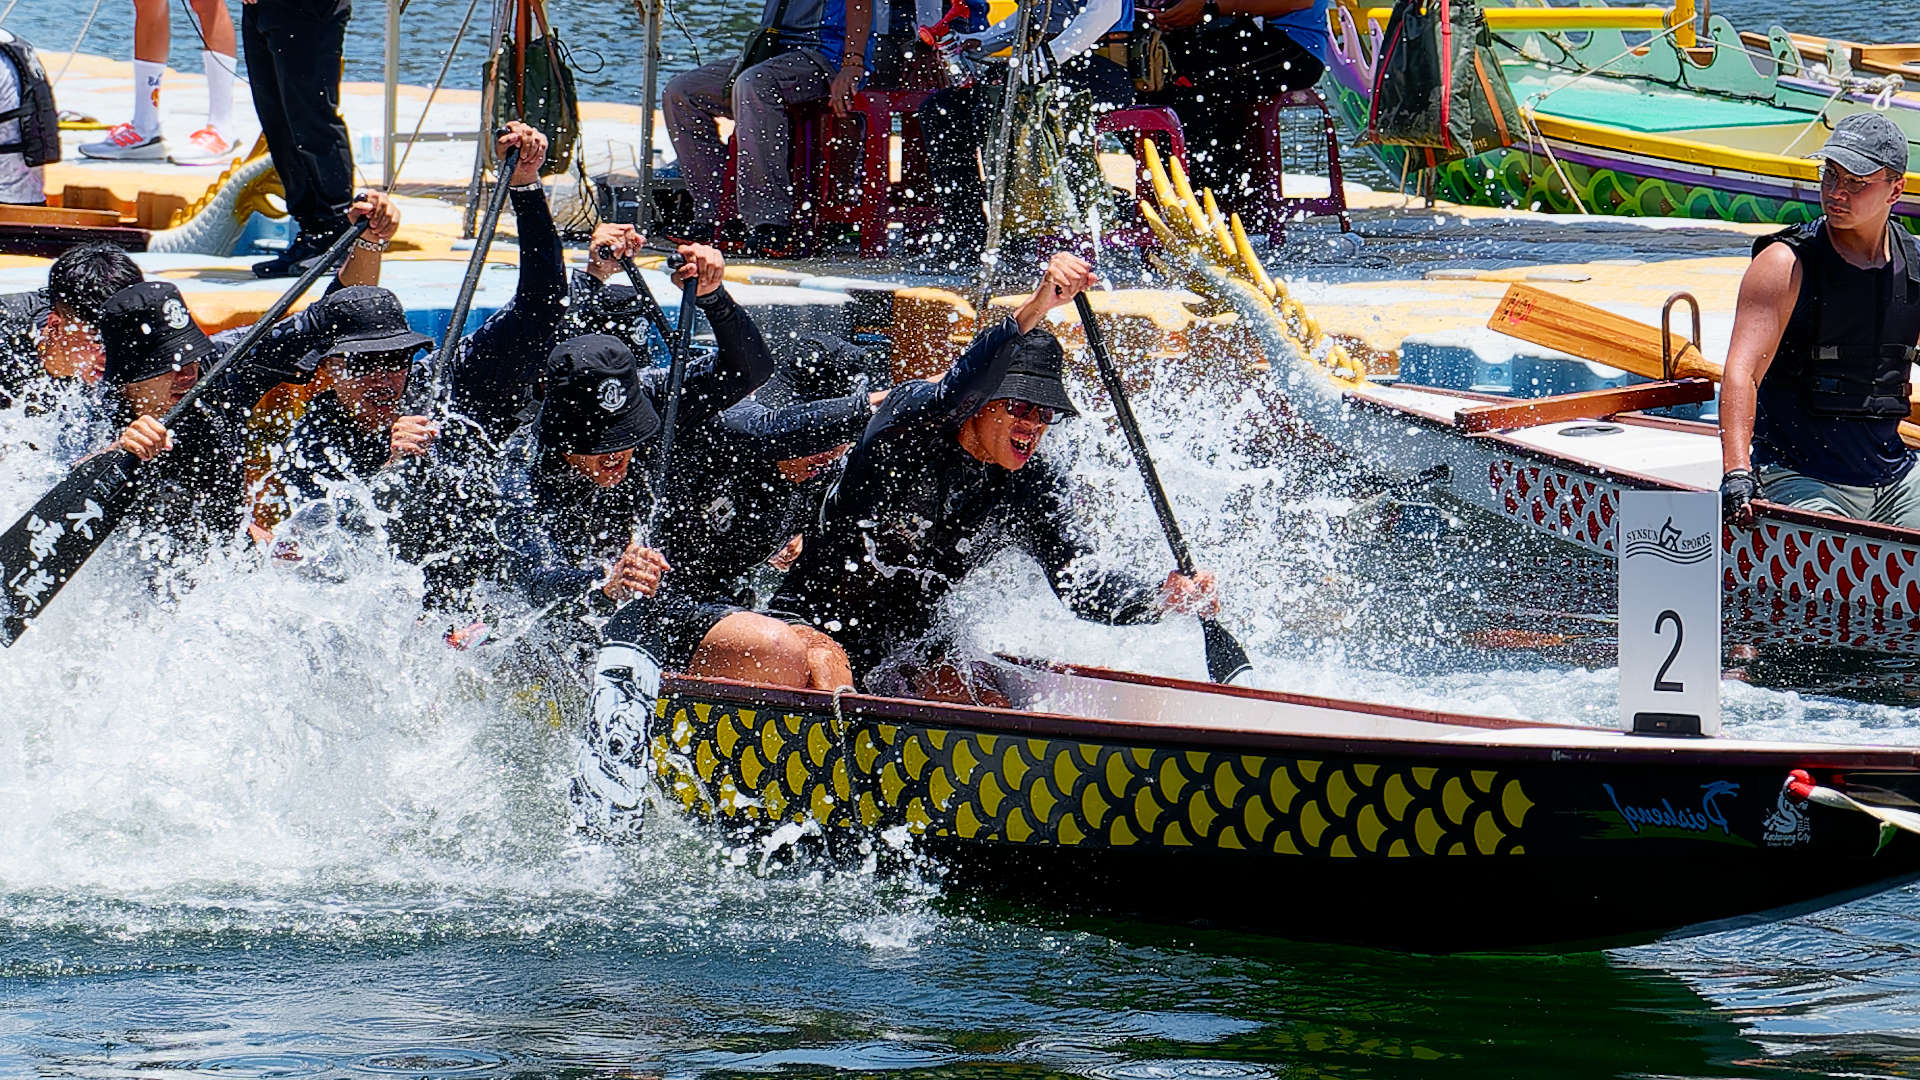 Close-up of paddlers in a dragon boat tug-of-war competition in Kaohsiung, Taiwan. Many of the paddlers are obscured by splashing water.